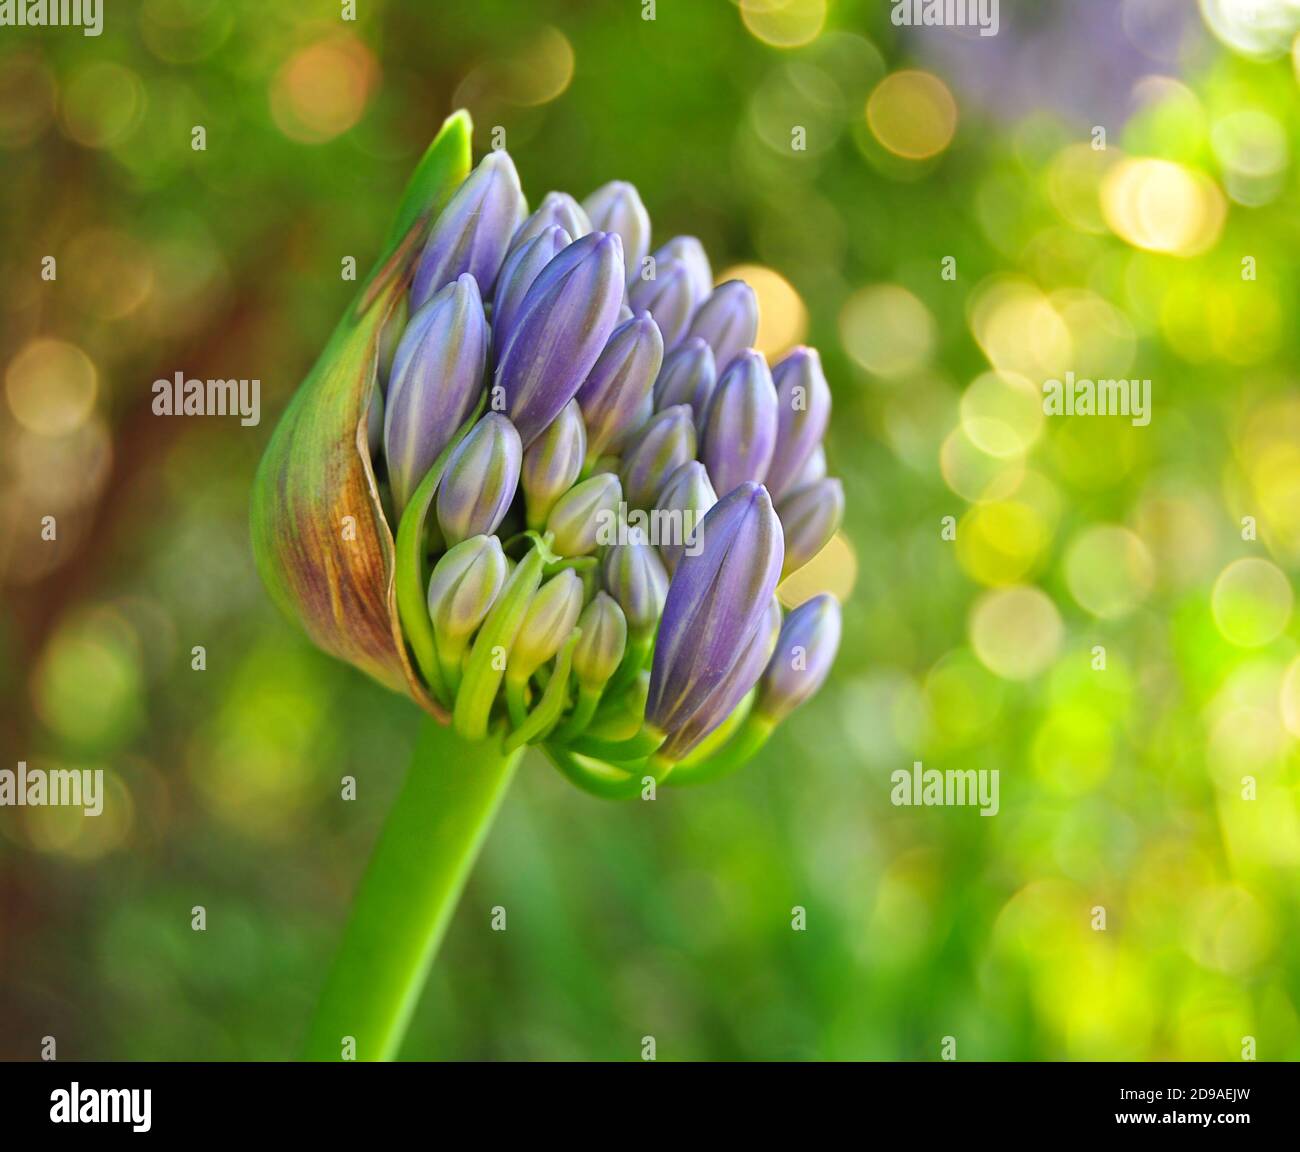 Beautiful Agapanthus flower bud, Lily of the Nile or African Lily, Agapanthus Africanus Stock Photo